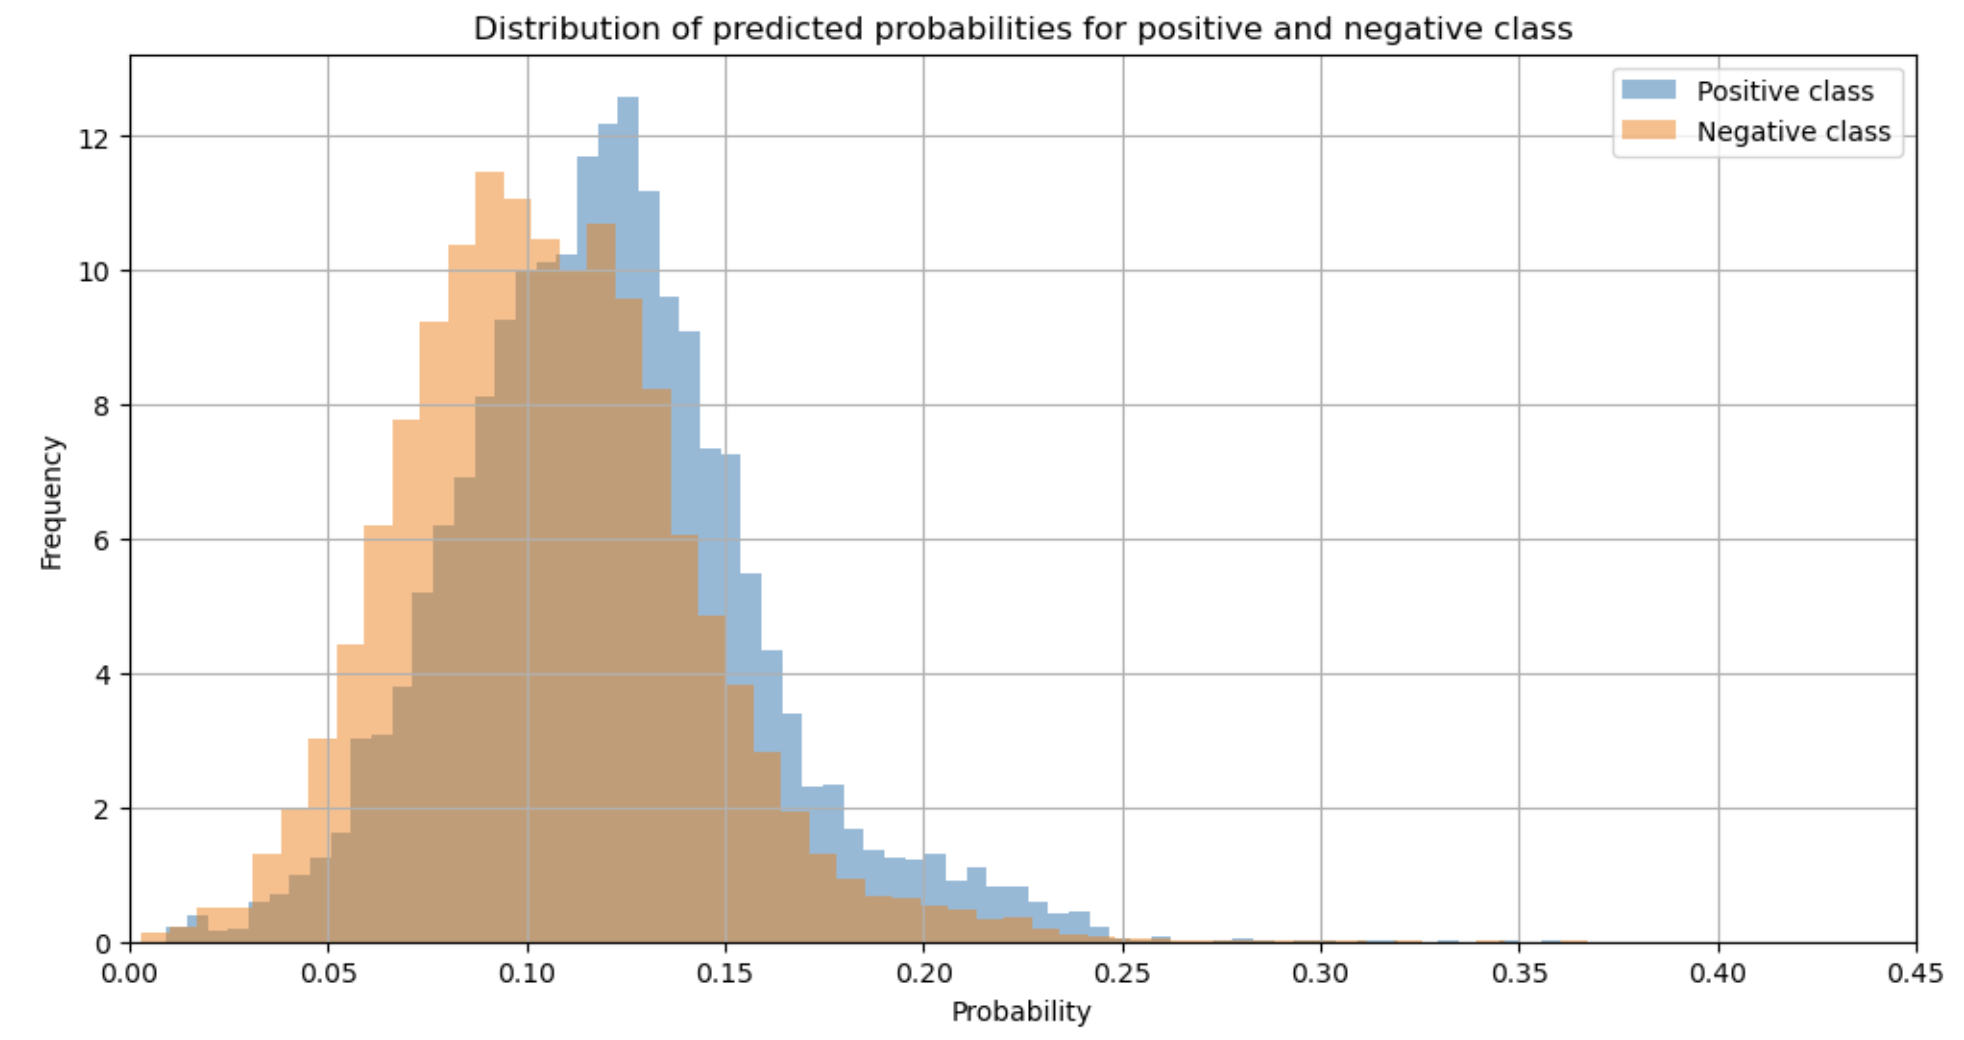 Predicted probability histogram for positive and negative classes